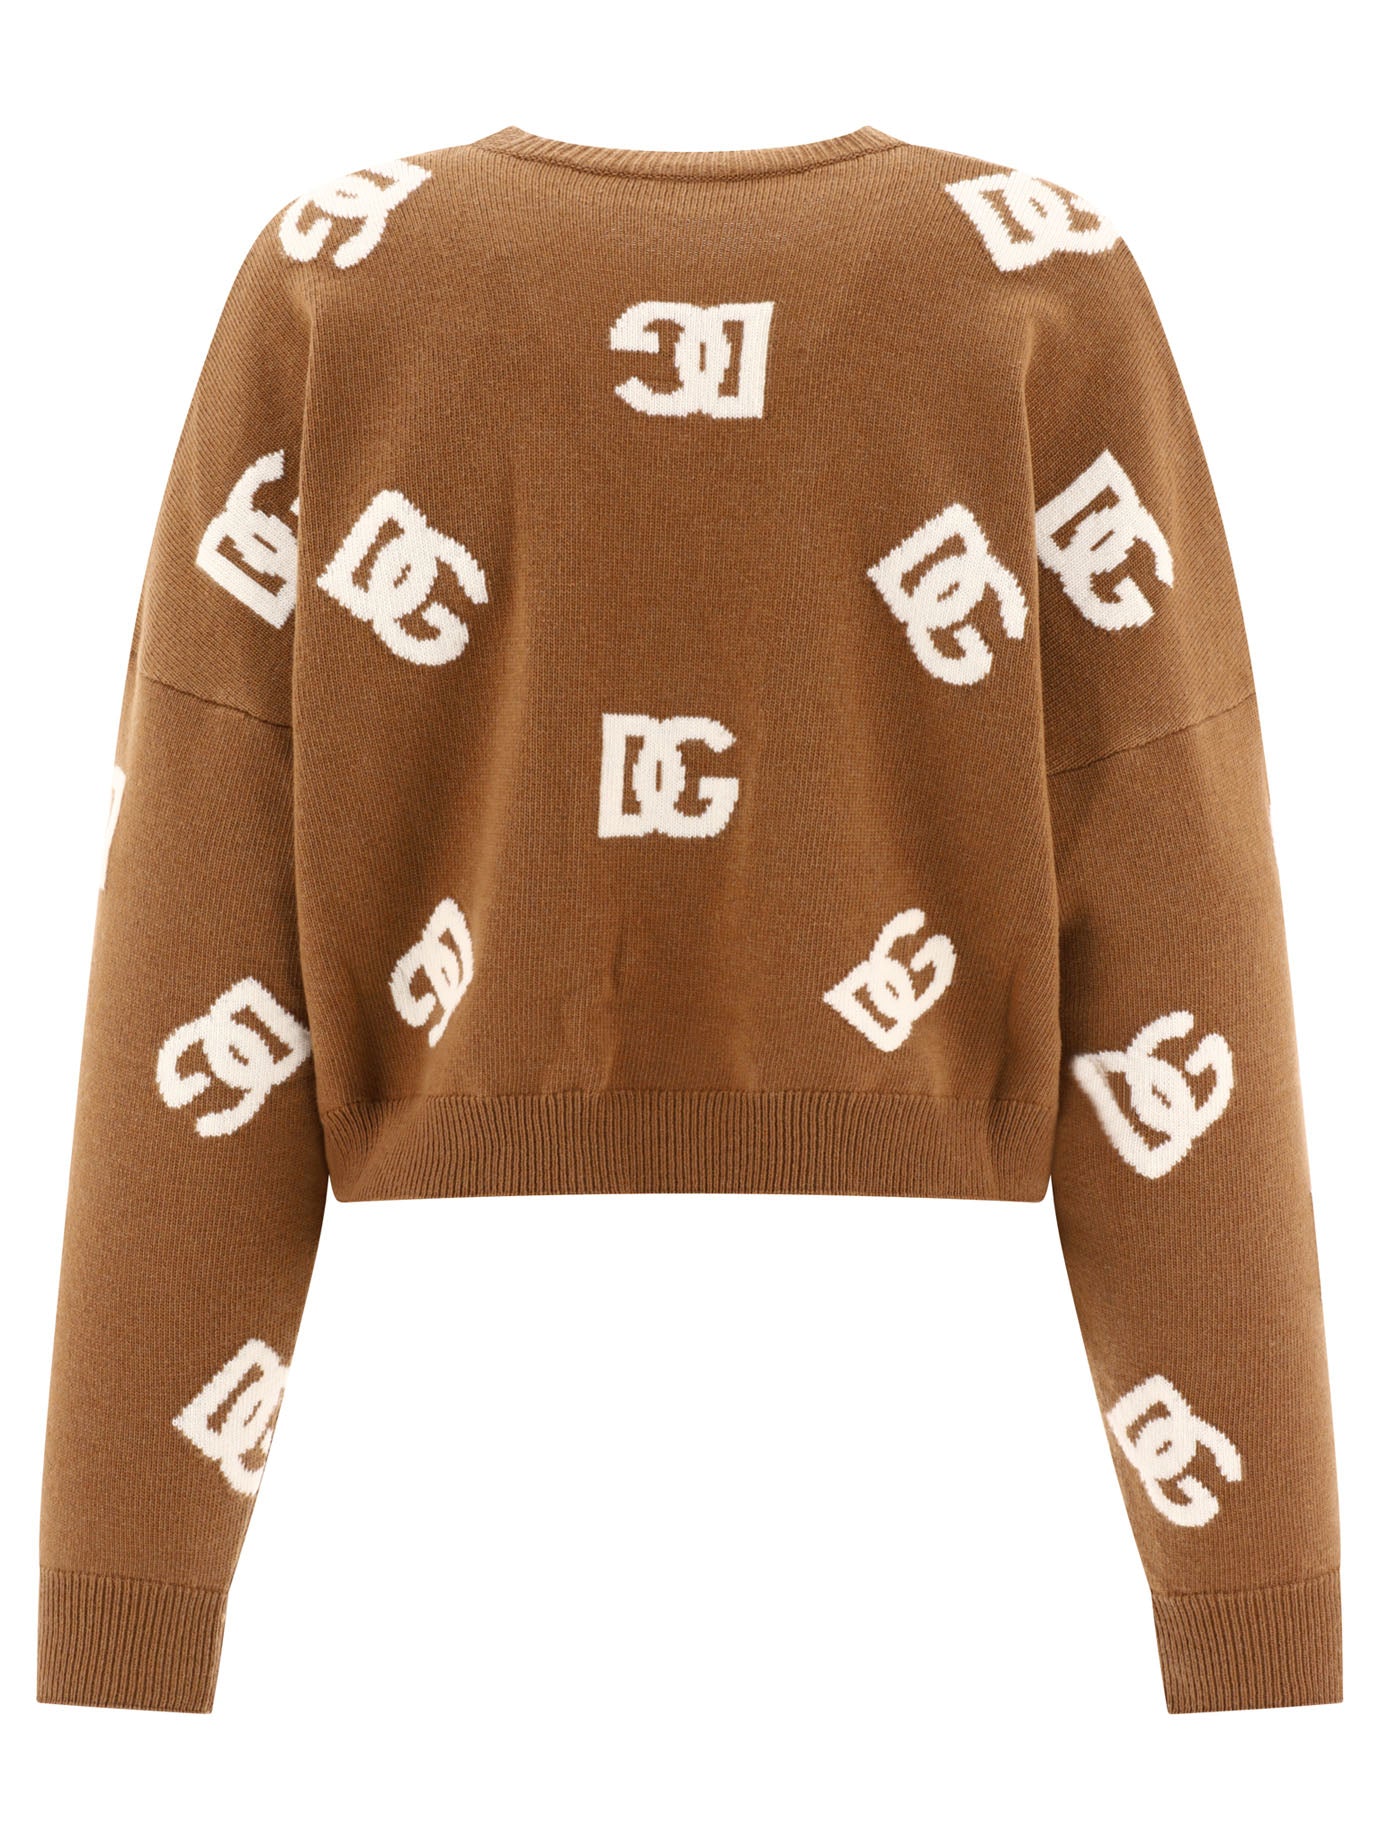 Dolce & Gabbana Cropped Wool Sweater with DG Inlay - 42